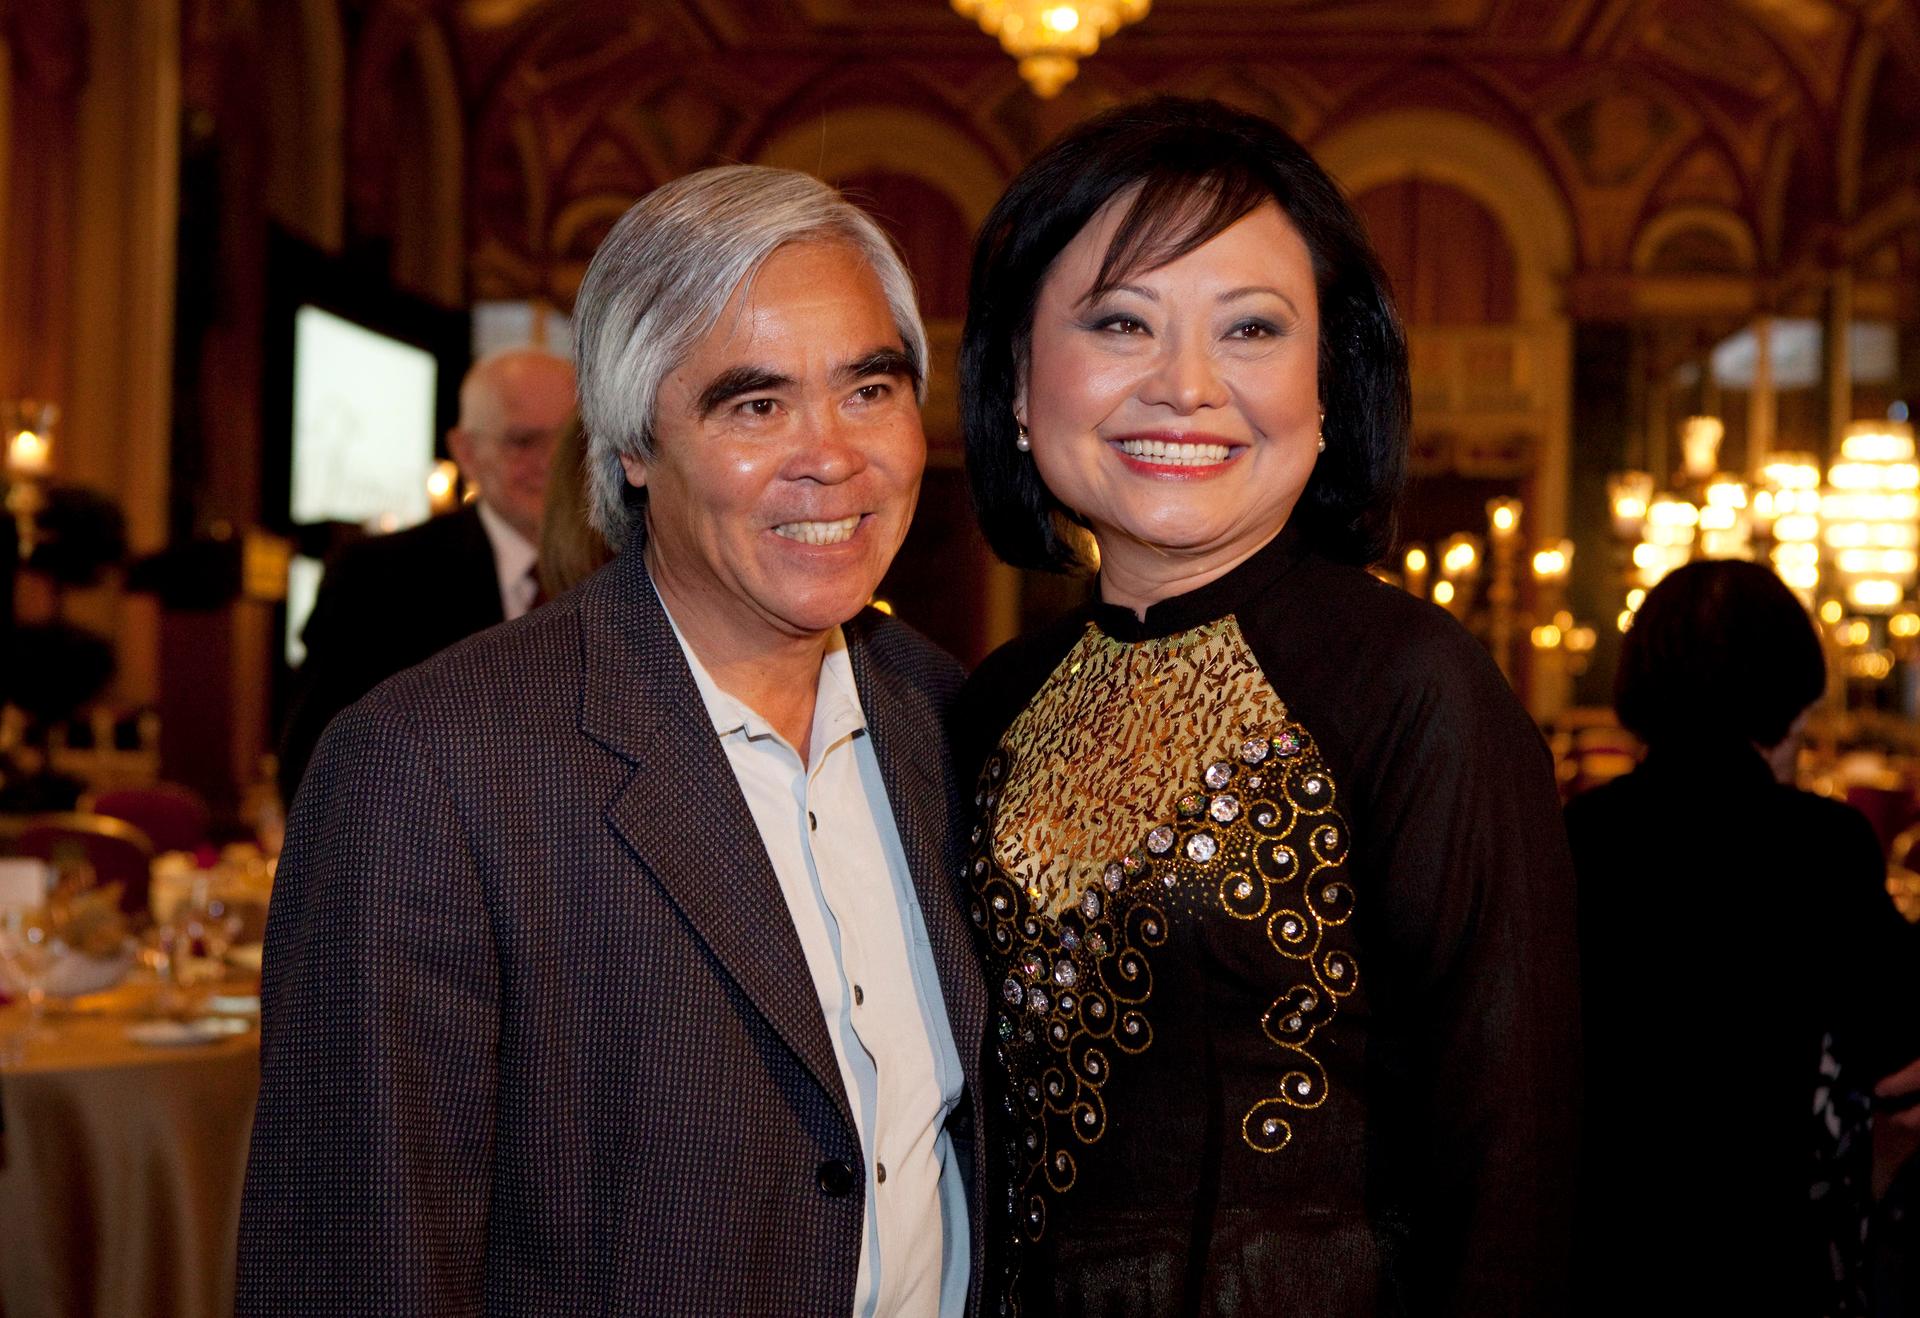 Photojournalist Nick Ut and Kim Phuc Phan Thi pose for pictures at the 